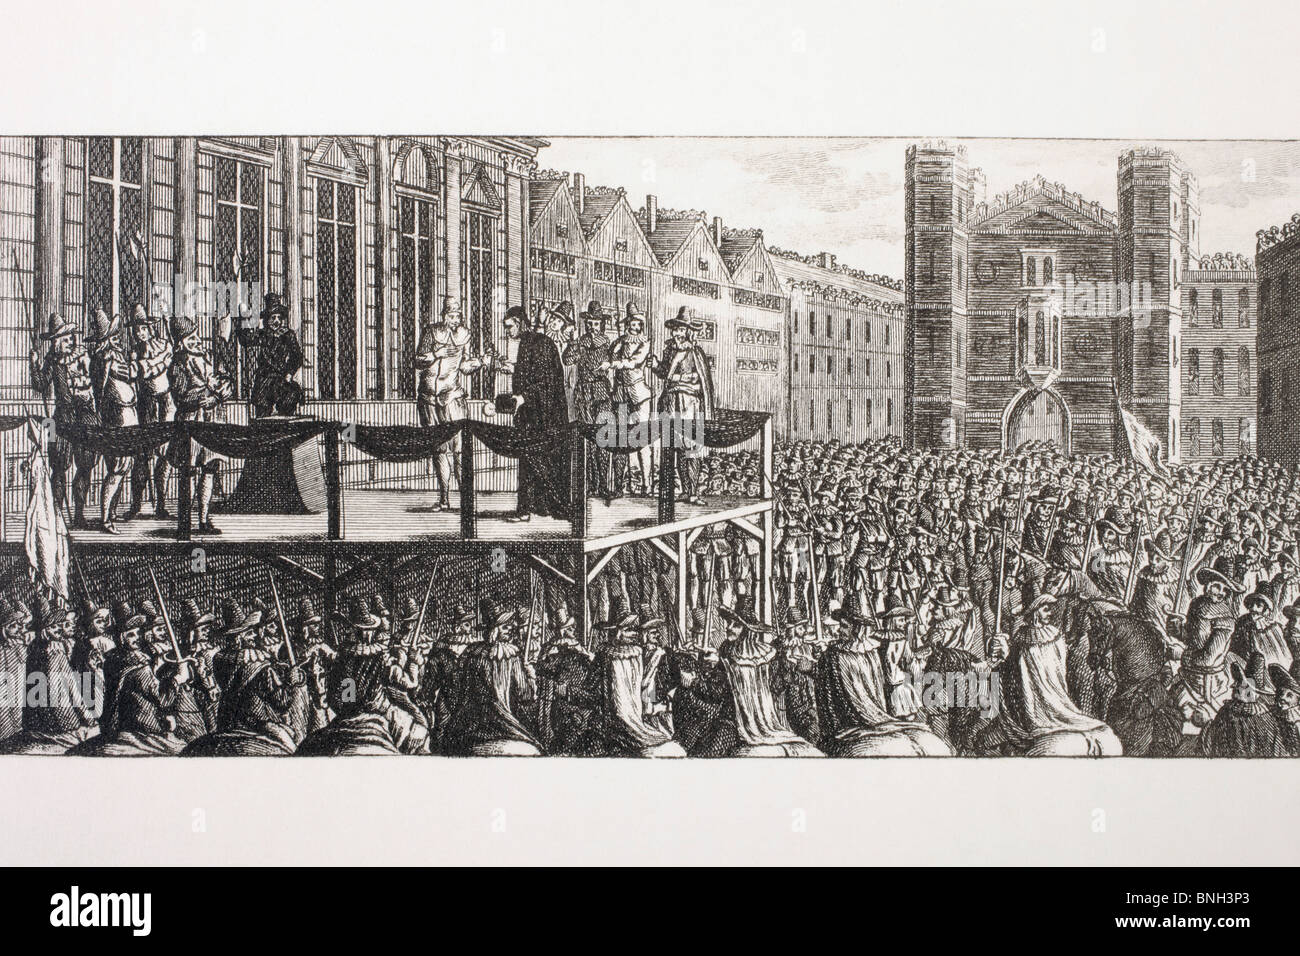 The execution of King Charles I of England, 1649 Stock Photo